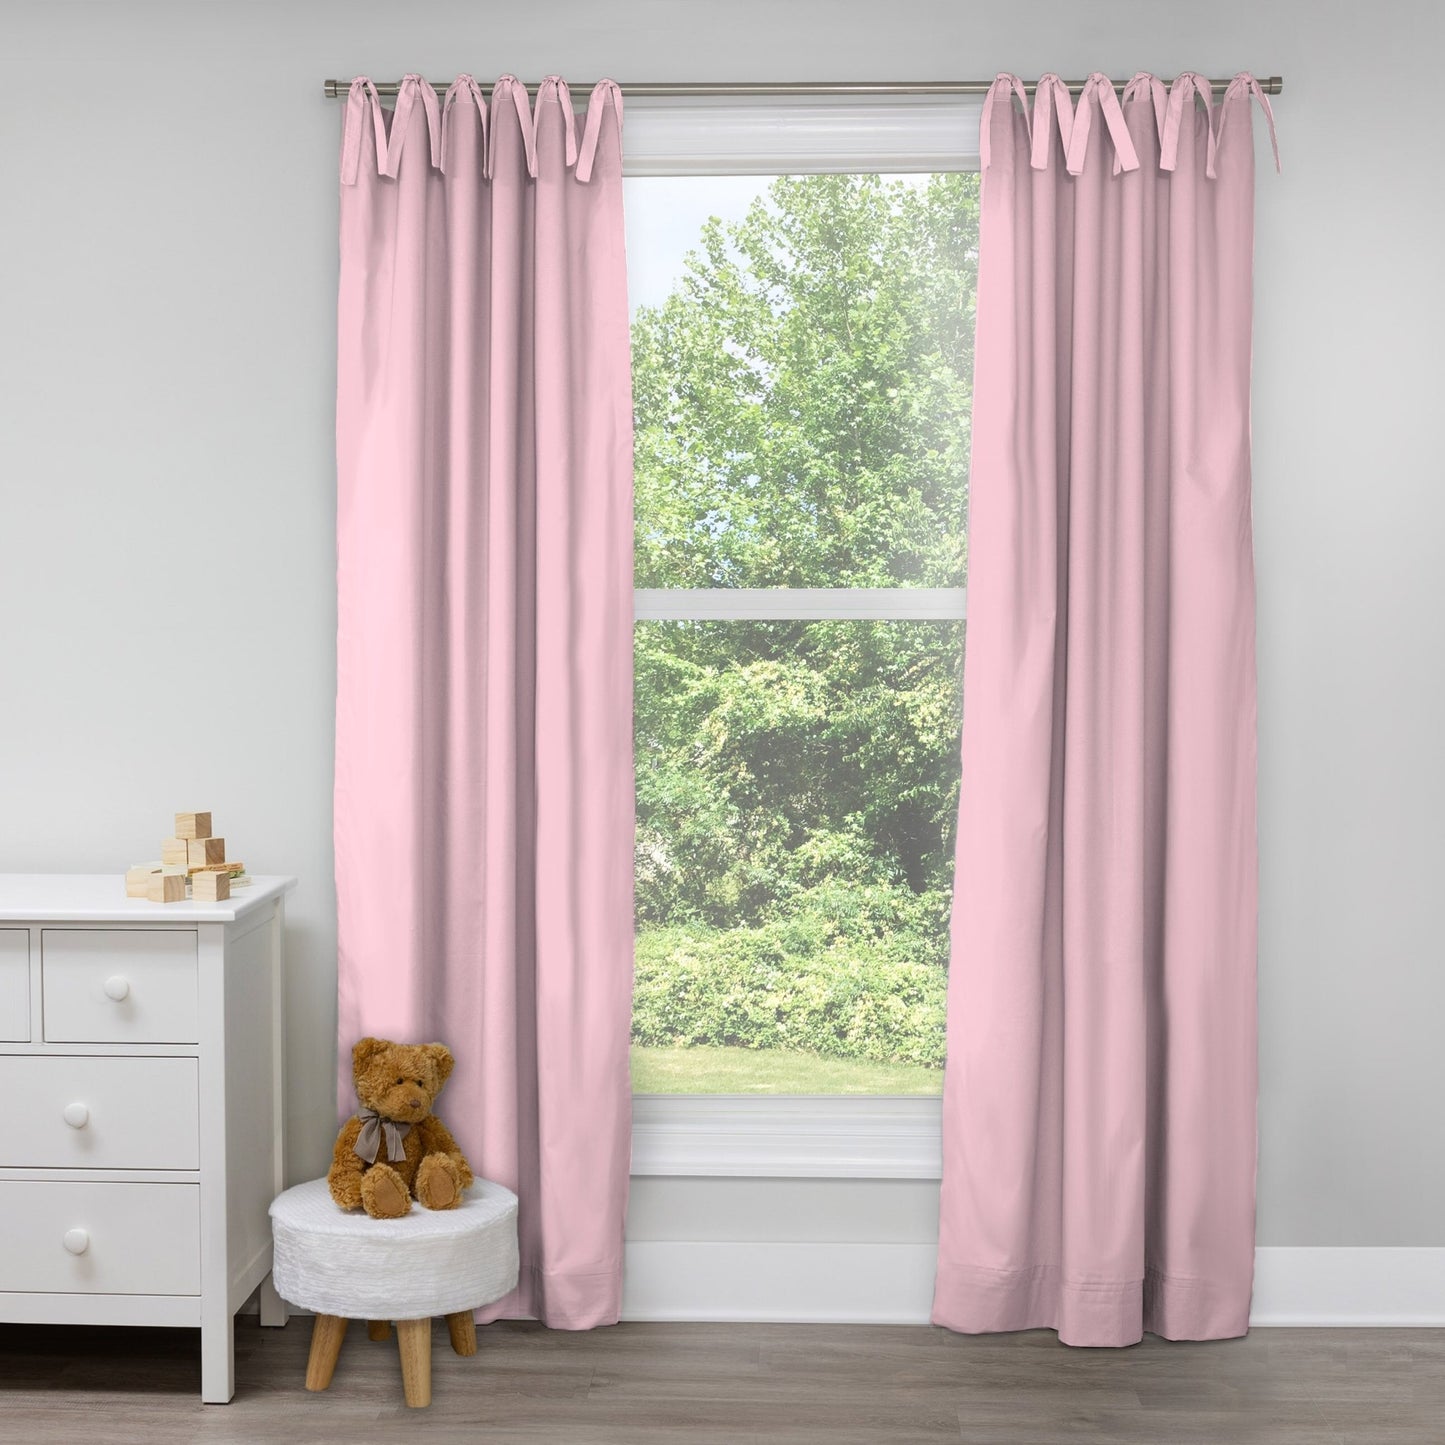 Pink and White Drape Panels - New Arrivals Inc